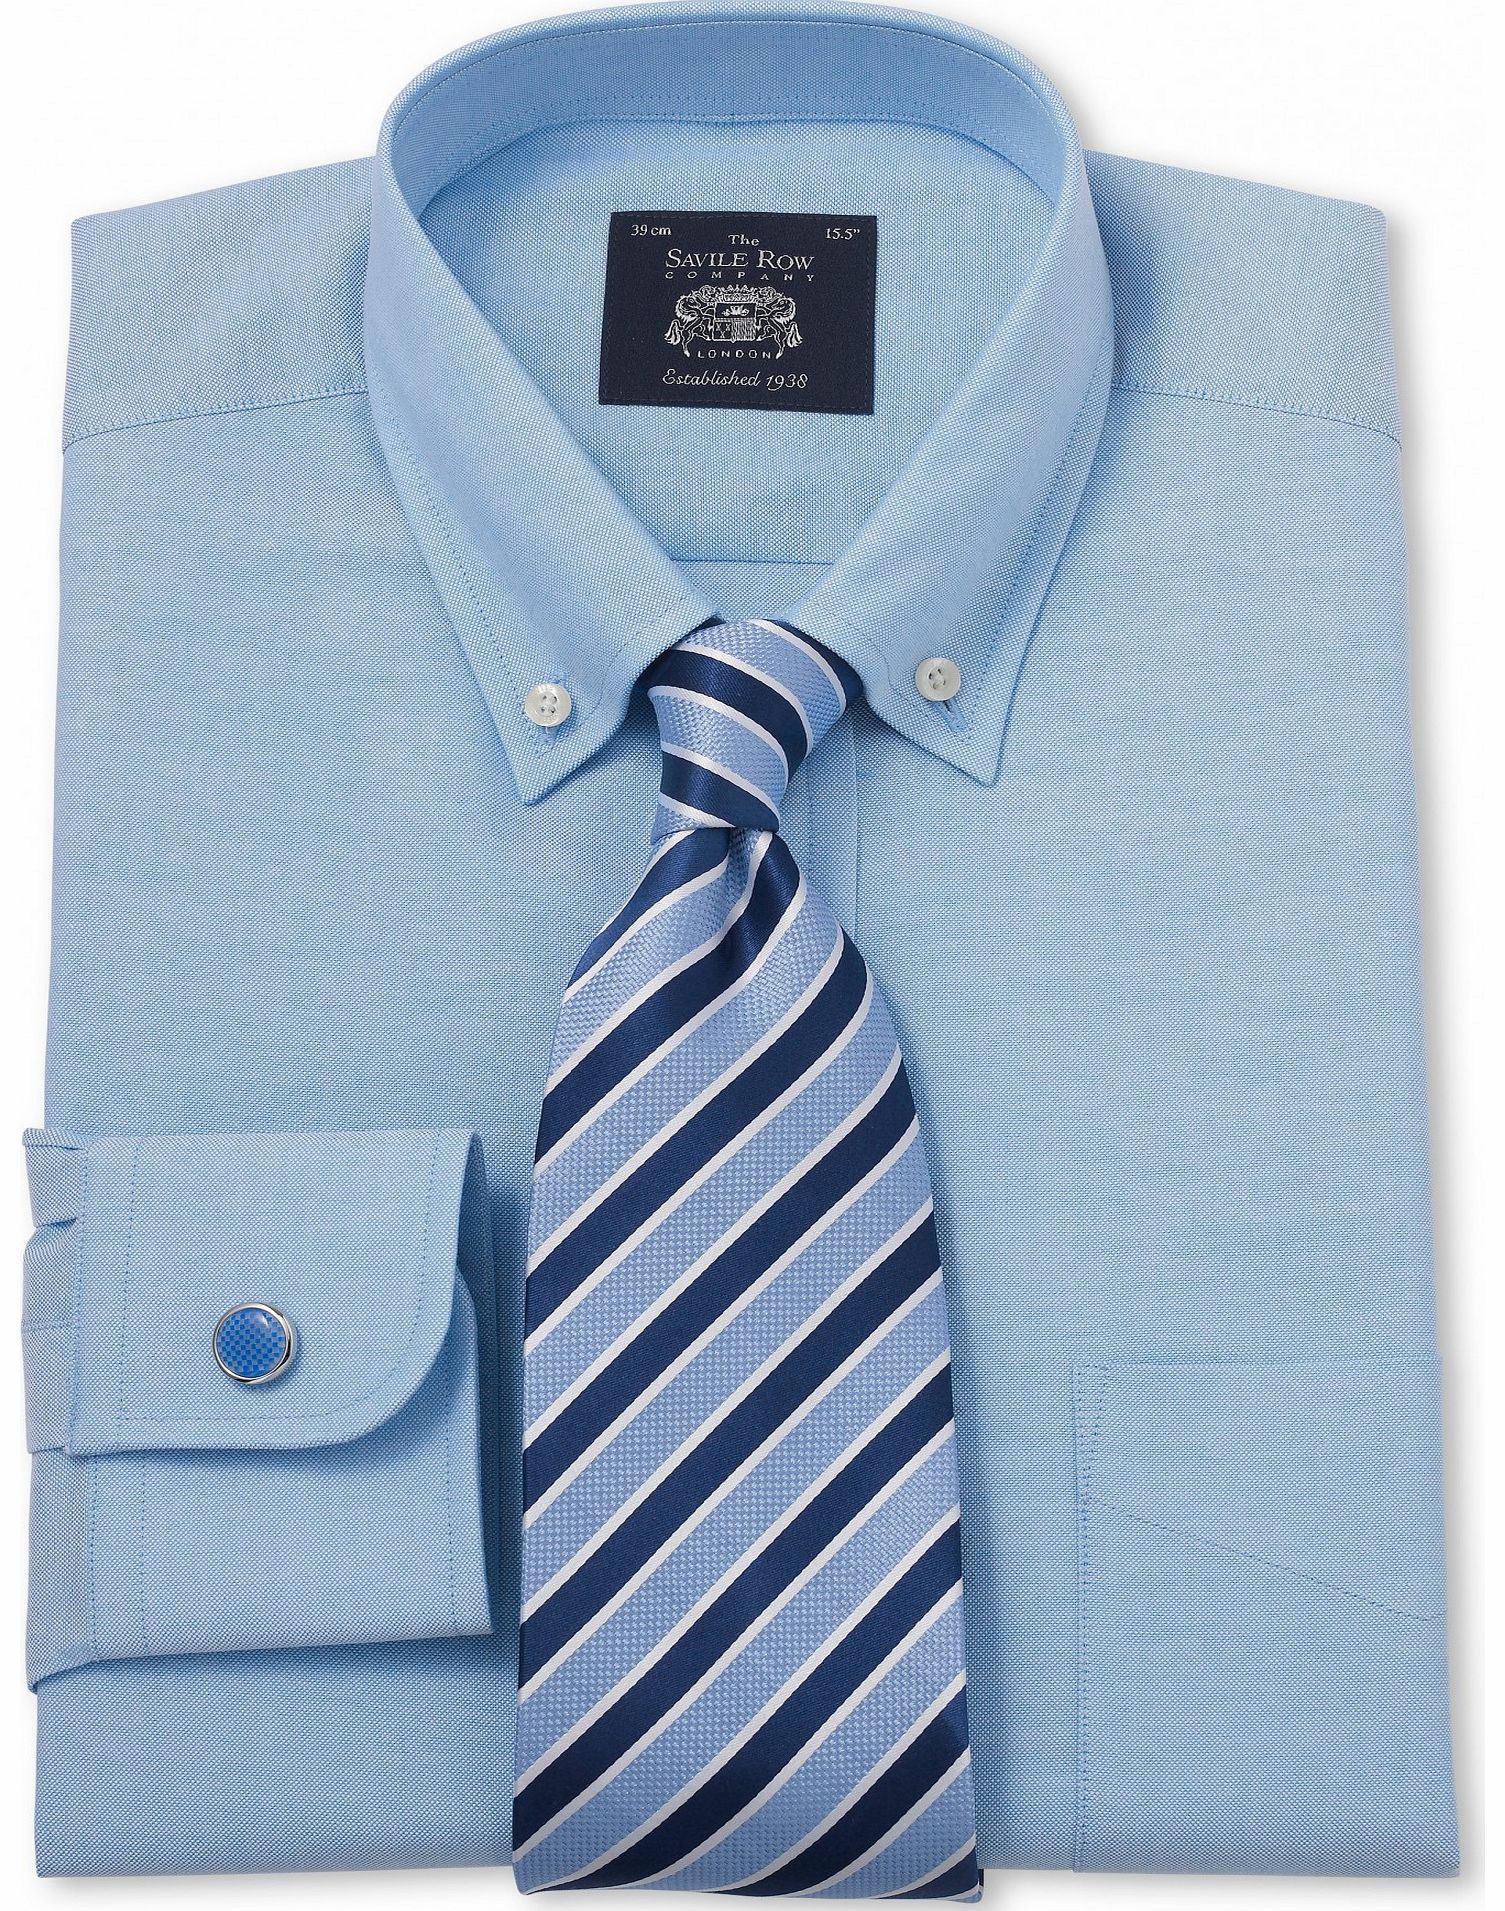 Savile Row Company Blue Pinpoint Classic Fit Shirt 18 1/2``